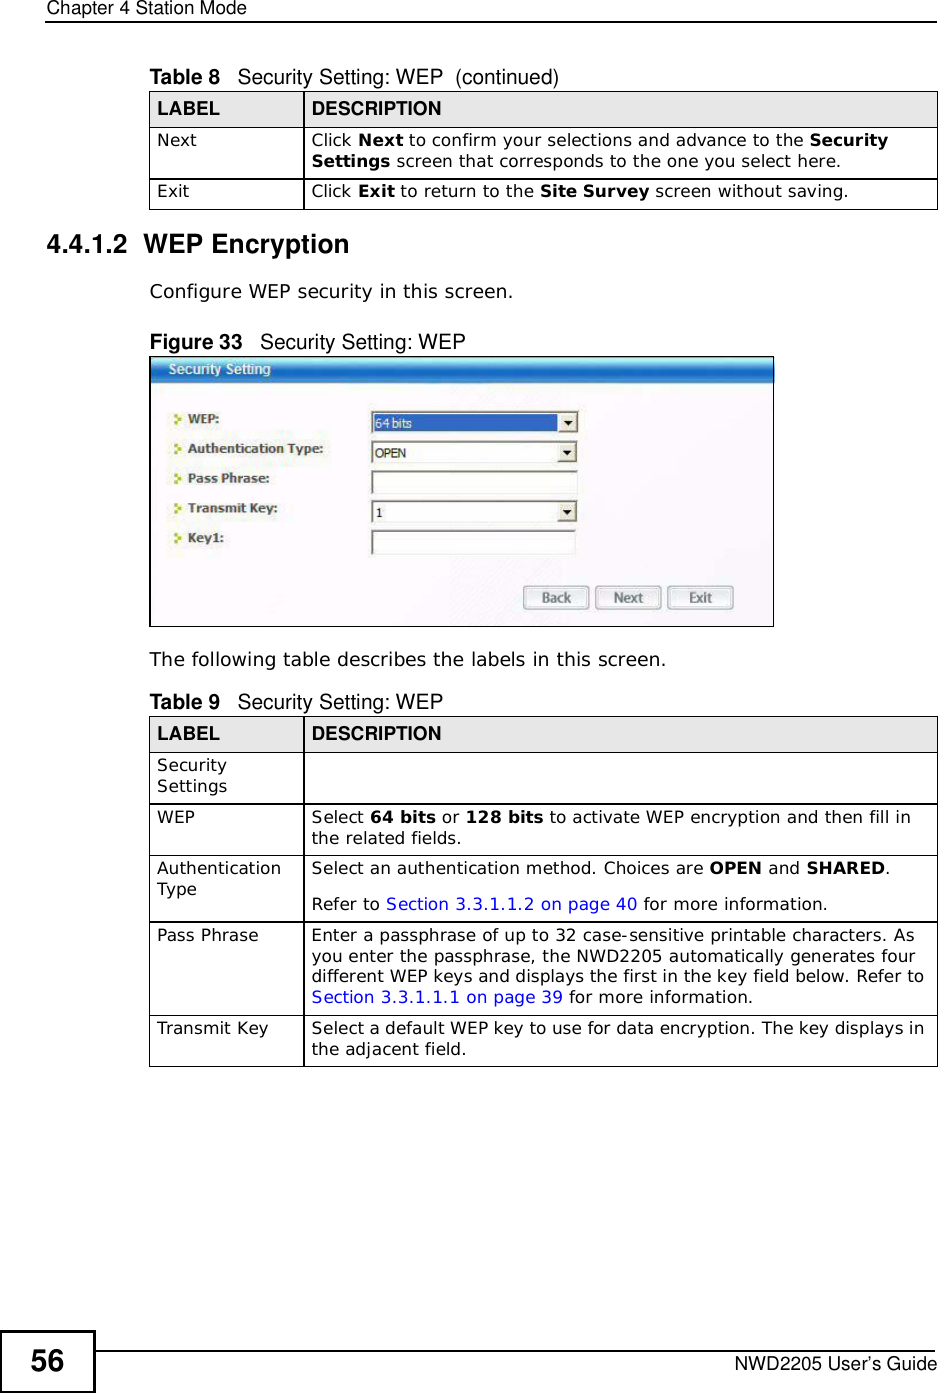 Chapter 4Station ModeNWD2205 User’s Guide564.4.1.2  WEP EncryptionConfigure WEP security in this screen. Figure 33   Security Setting: WEPThe following table describes the labels in this screen.  NextClick Next to confirm your selections and advance to the Security Settings screen that corresponds to the one you select here. ExitClick Exit to return to the Site Survey screen without saving.Table 8   Security Setting: WEP  (continued)LABEL DESCRIPTIONTable 9   Security Setting: WEP LABEL DESCRIPTIONSecurity SettingsWEPSelect 64 bits or 128 bits to activate WEP encryption and then fill in the related fields.Authentication Type Select an authentication method. Choices are OPEN and SHARED.Refer to Section 3.3.1.1.2 on page 40 for more information.Pass PhraseEnter a passphrase of up to 32 case-sensitive printable characters. As you enter the passphrase, the NWD2205 automatically generates four different WEP keys and displays the first in the key field below. Refer to Section 3.3.1.1.1 on page 39 for more information.Transmit KeySelect a default WEP key to use for data encryption. The key displays in the adjacent field.